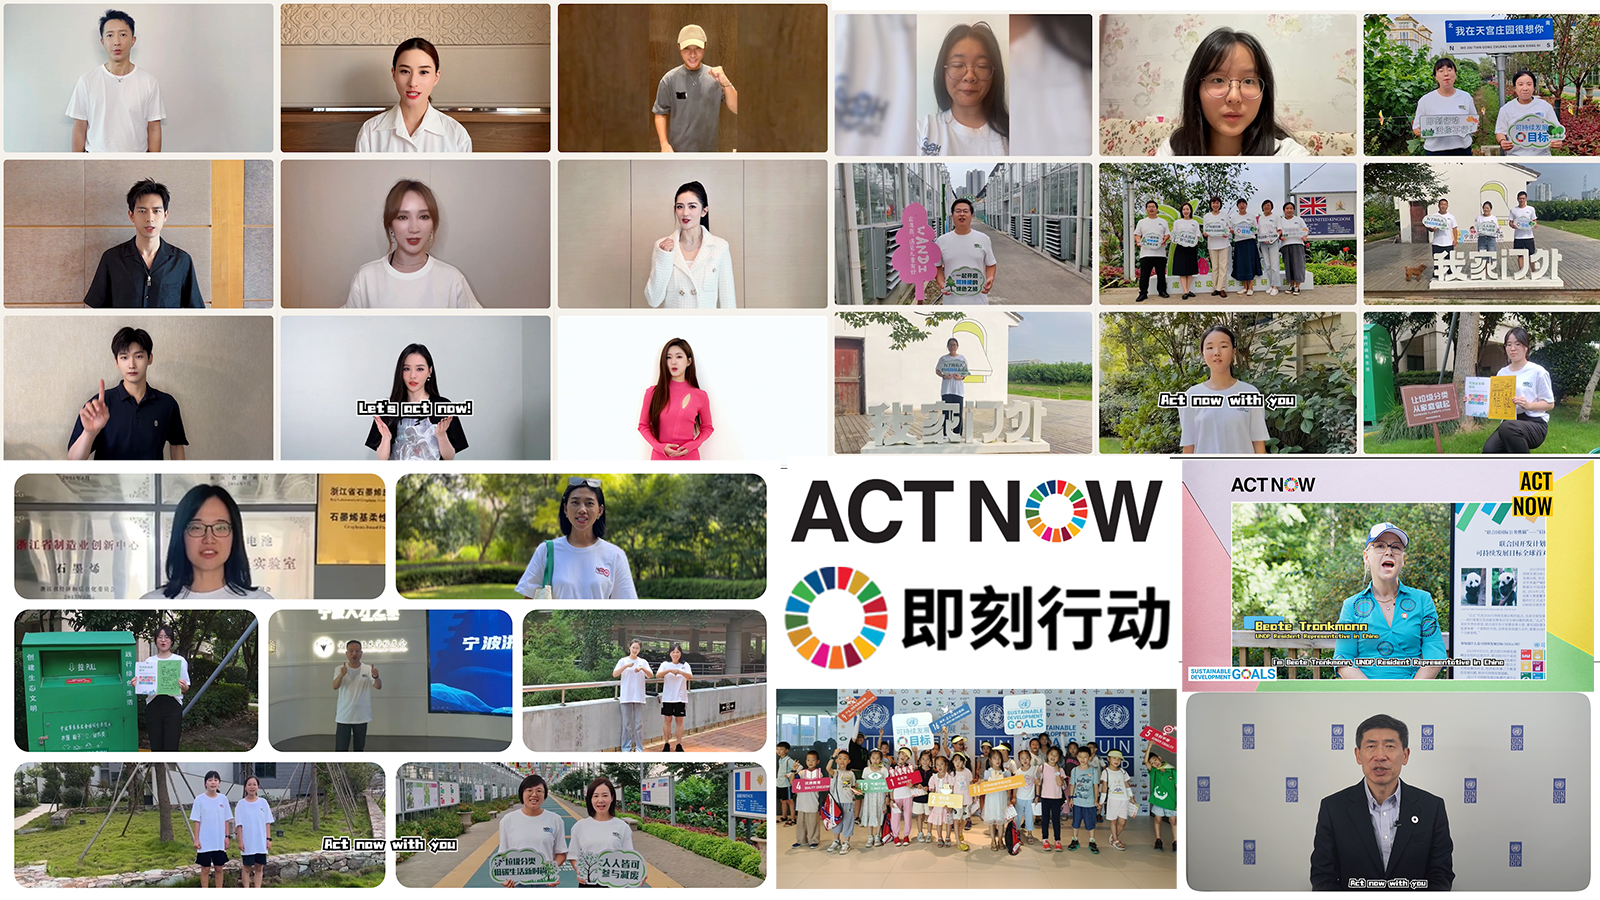 ACT NOW with You Campaign participants